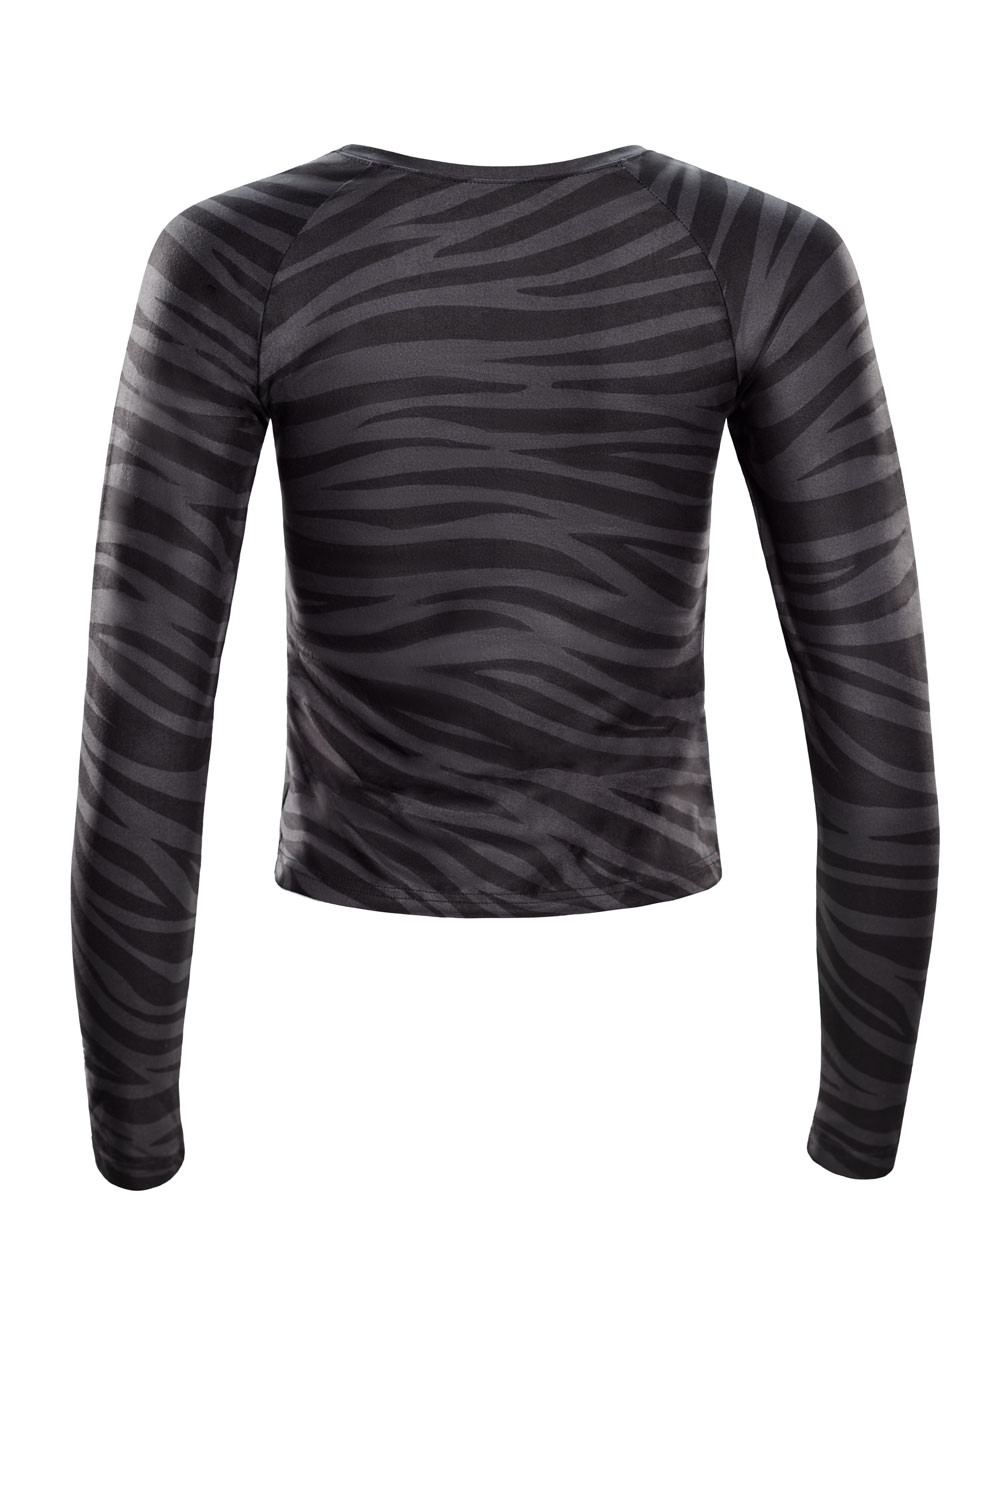 Functional Light and Top Soft Ultra Zebra, Style Sleeve Cropped AET119LS, Long Winshape Soft